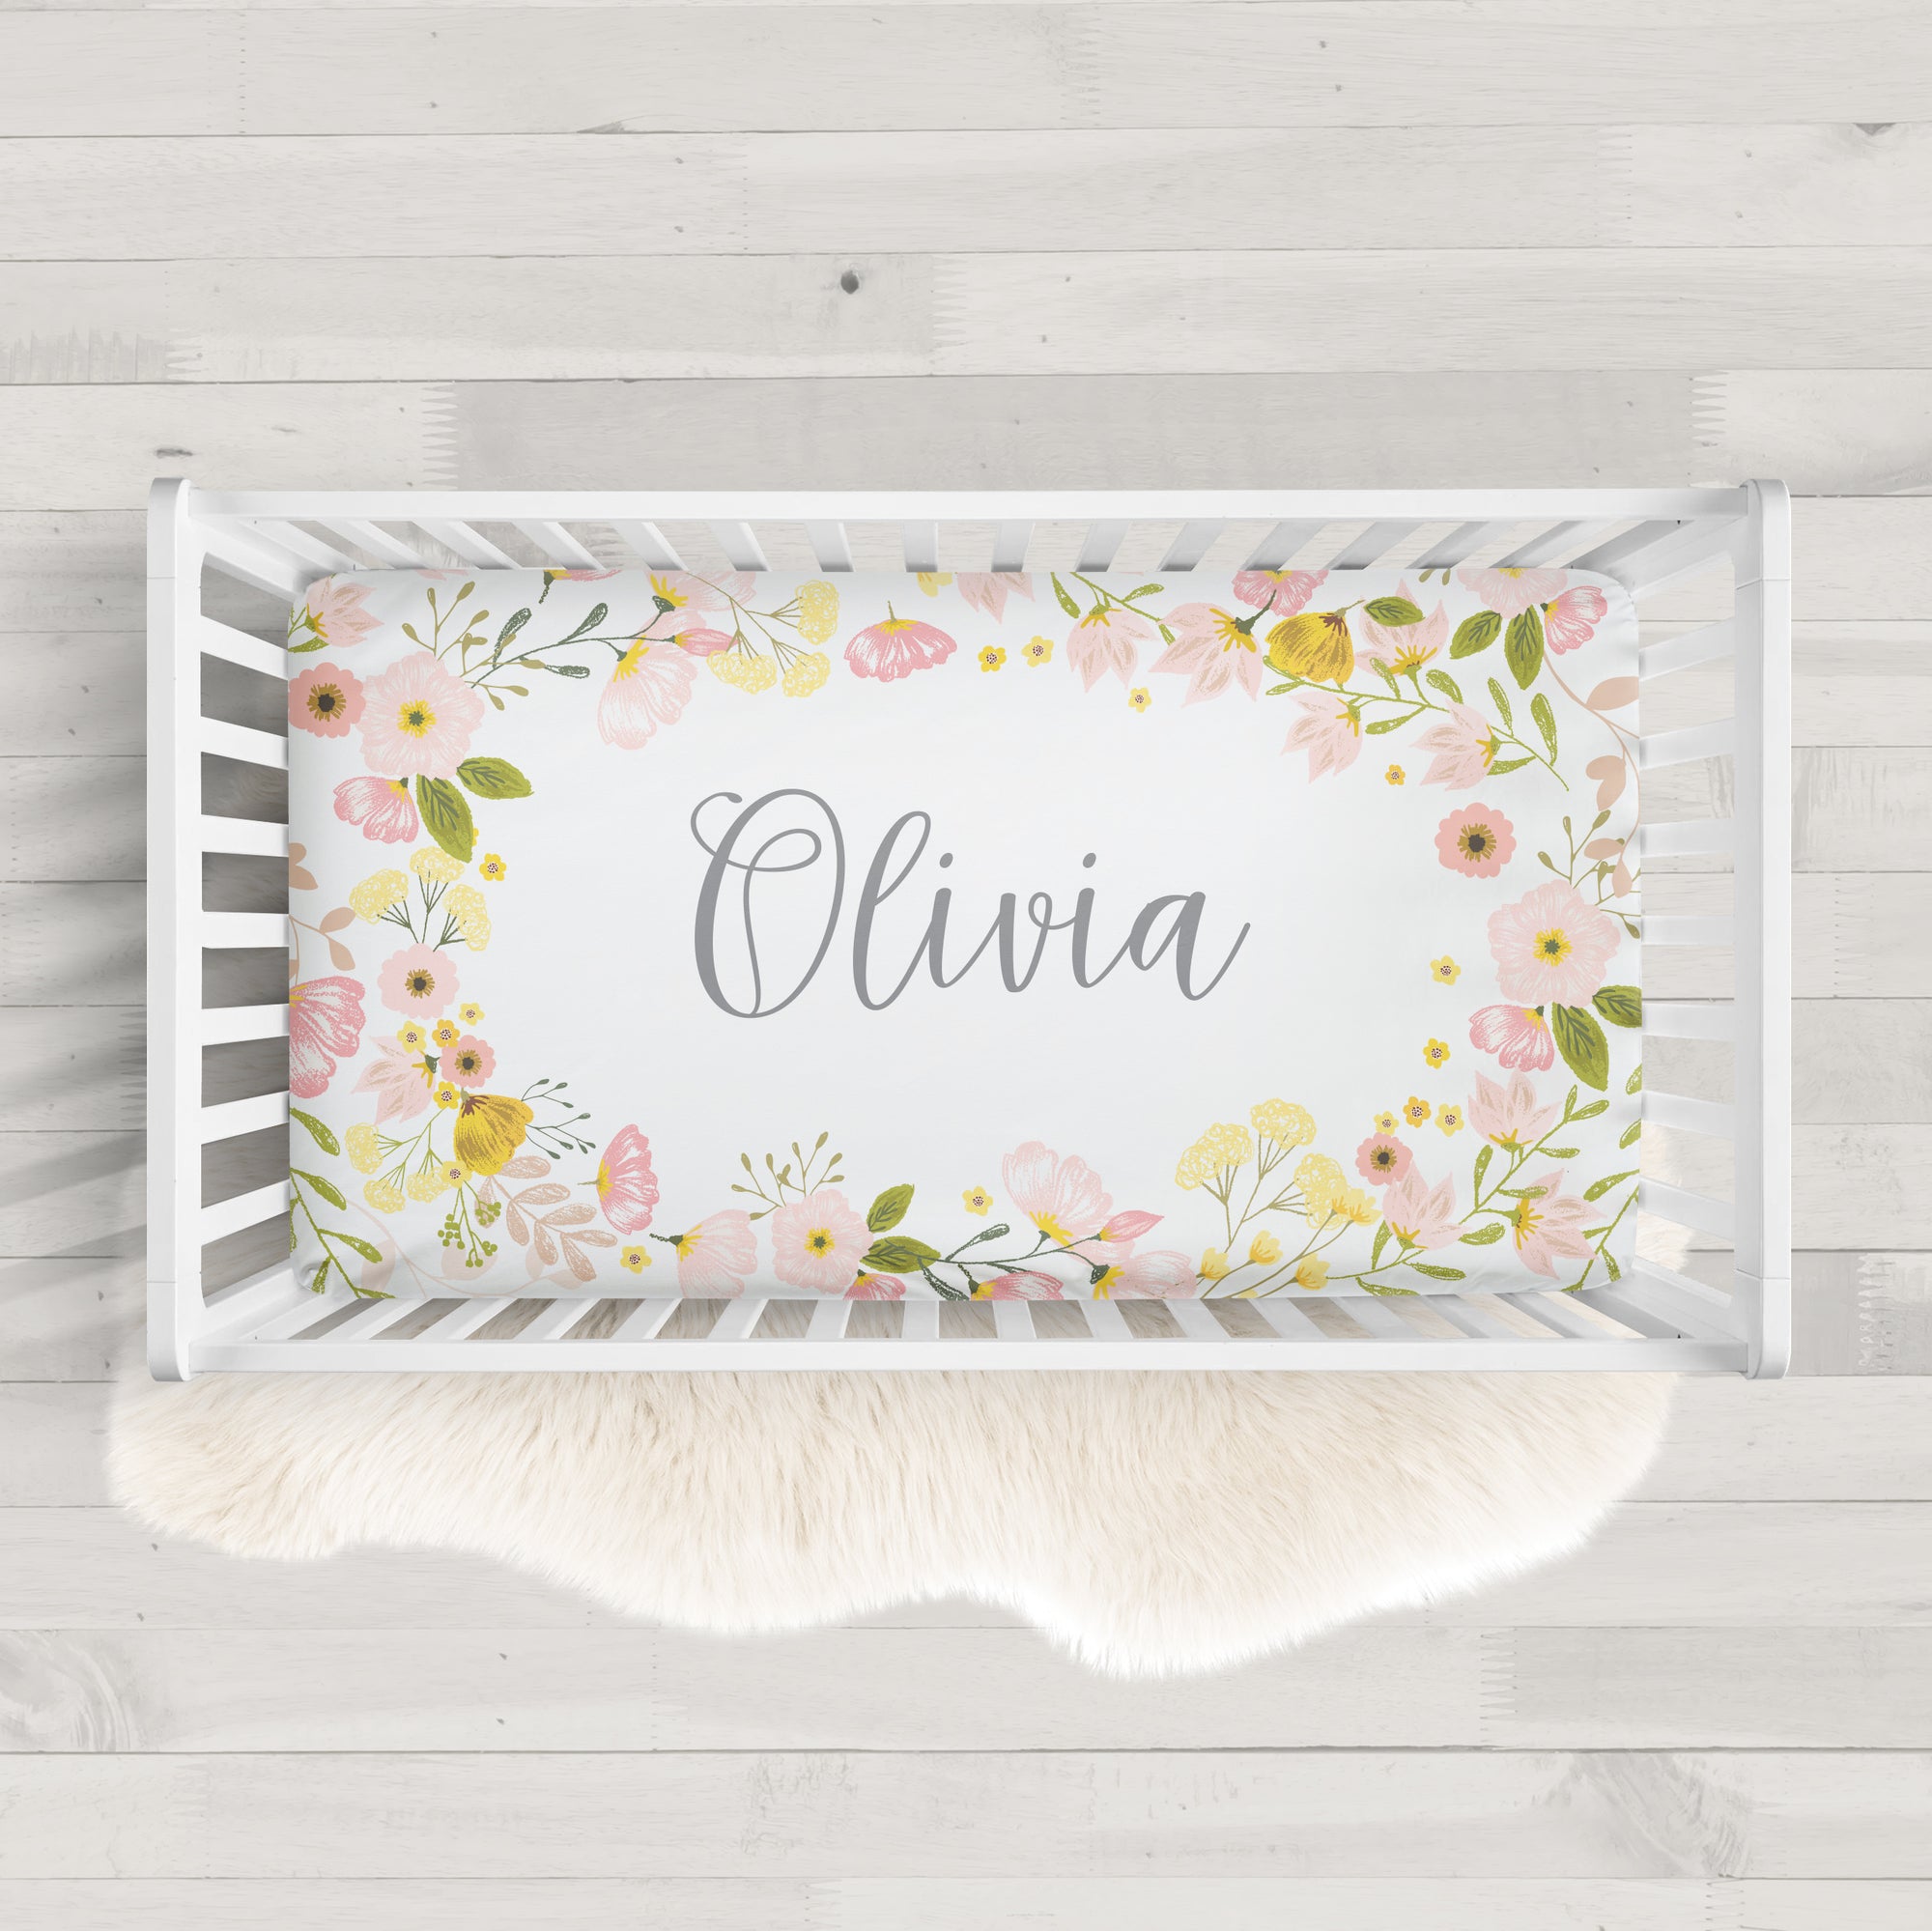 Personalized Floral Crib Sheet, Knit Jersey, Handmade | PIPSY.COM